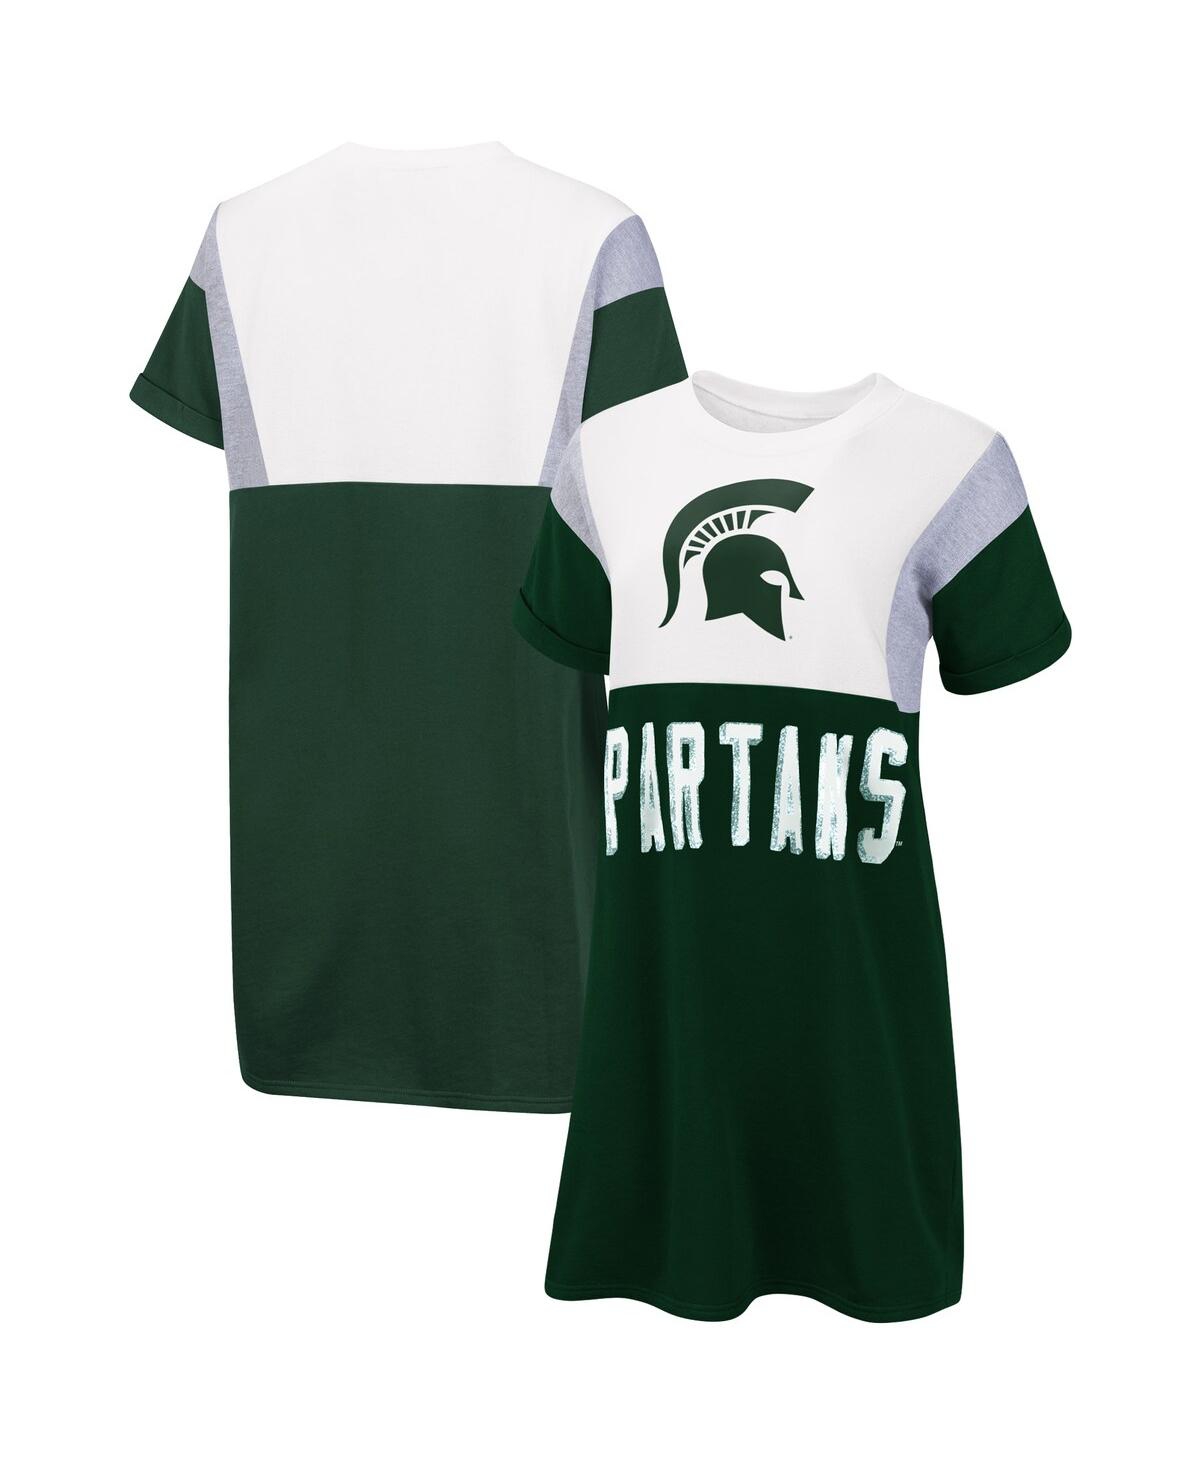 Women's G-iii 4Her by Carl Banks Green and White Michigan State Spartans 3rd Down Short Sleeve T-shirt Dress - Green, White